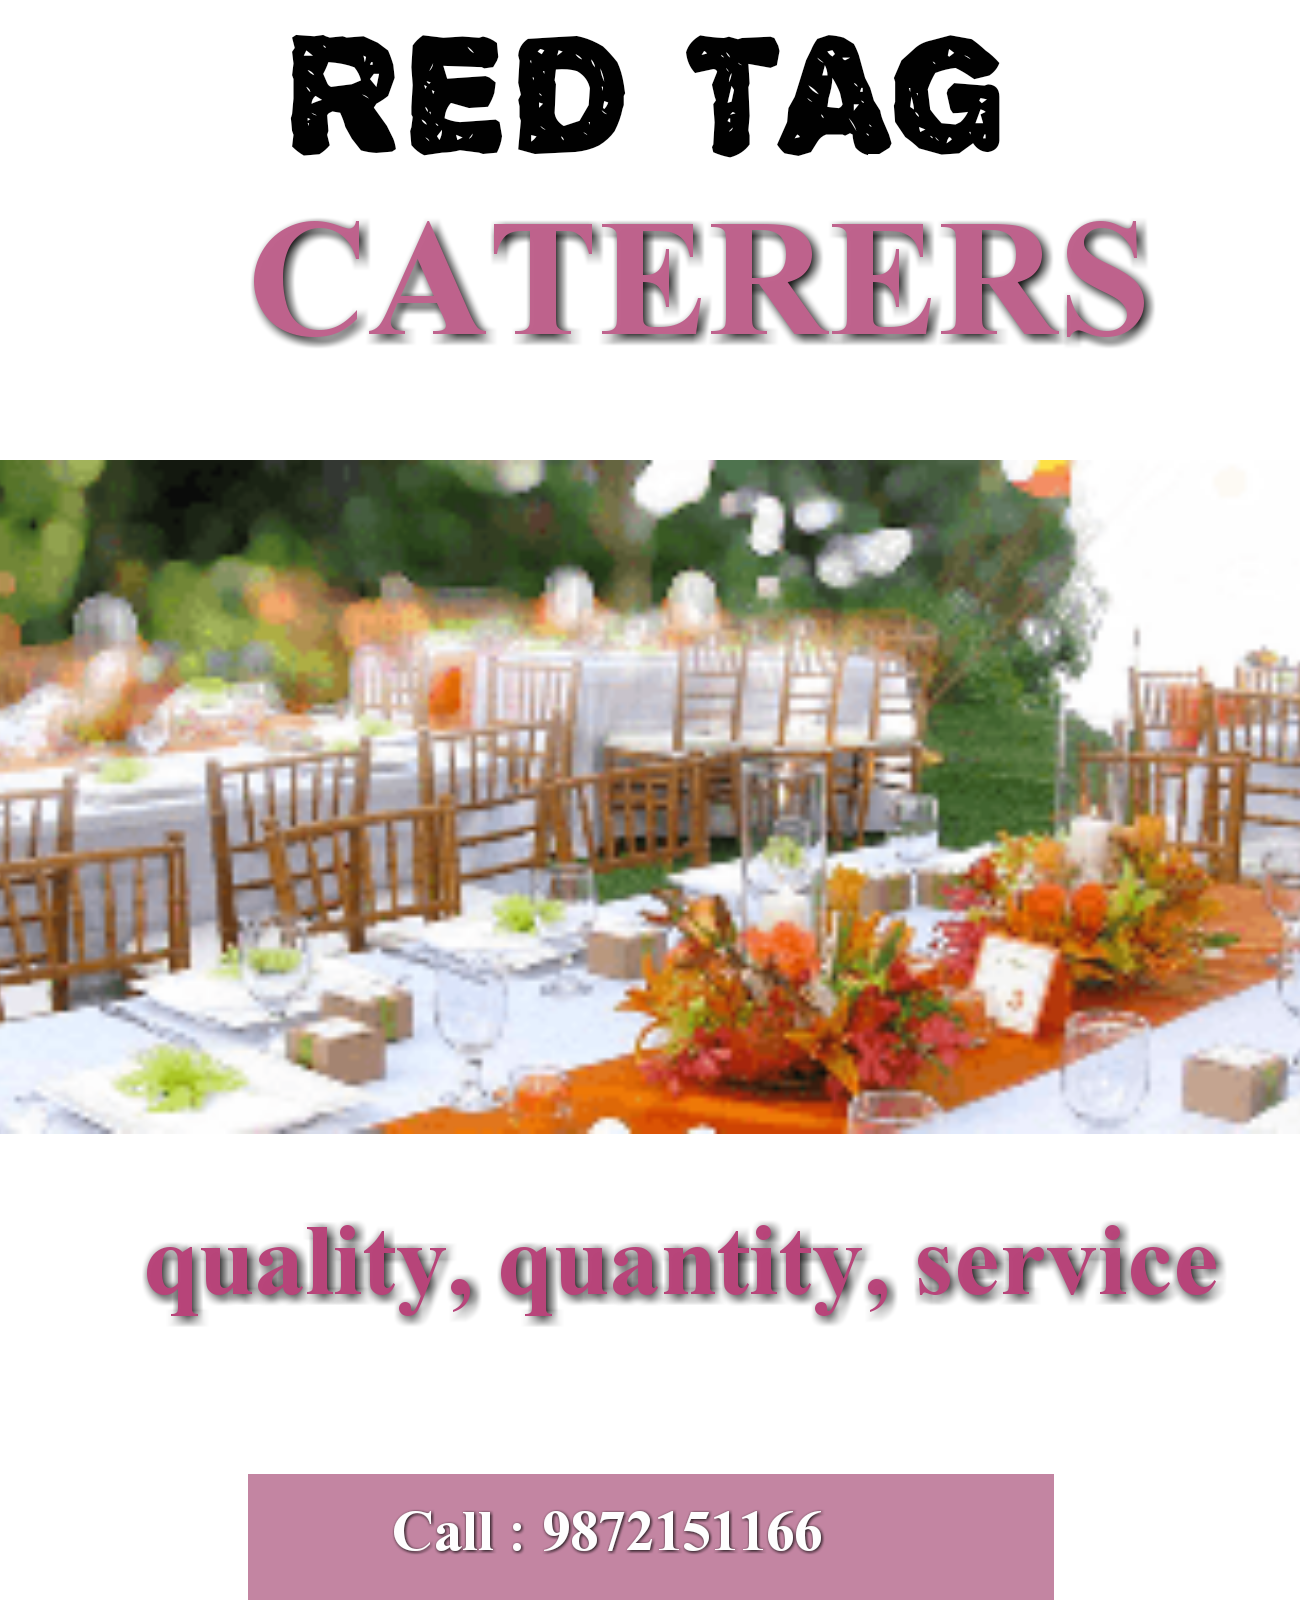 Best caterers in Ludhiana with creative cuisine  | Red Tag Caterers | Best caterers in Ludhiana with creative cuisine, best wedding caterers in Ludhiana, best party catering service in Ludhiana, best vegetarian catering in Ludhiana,  - GL44272